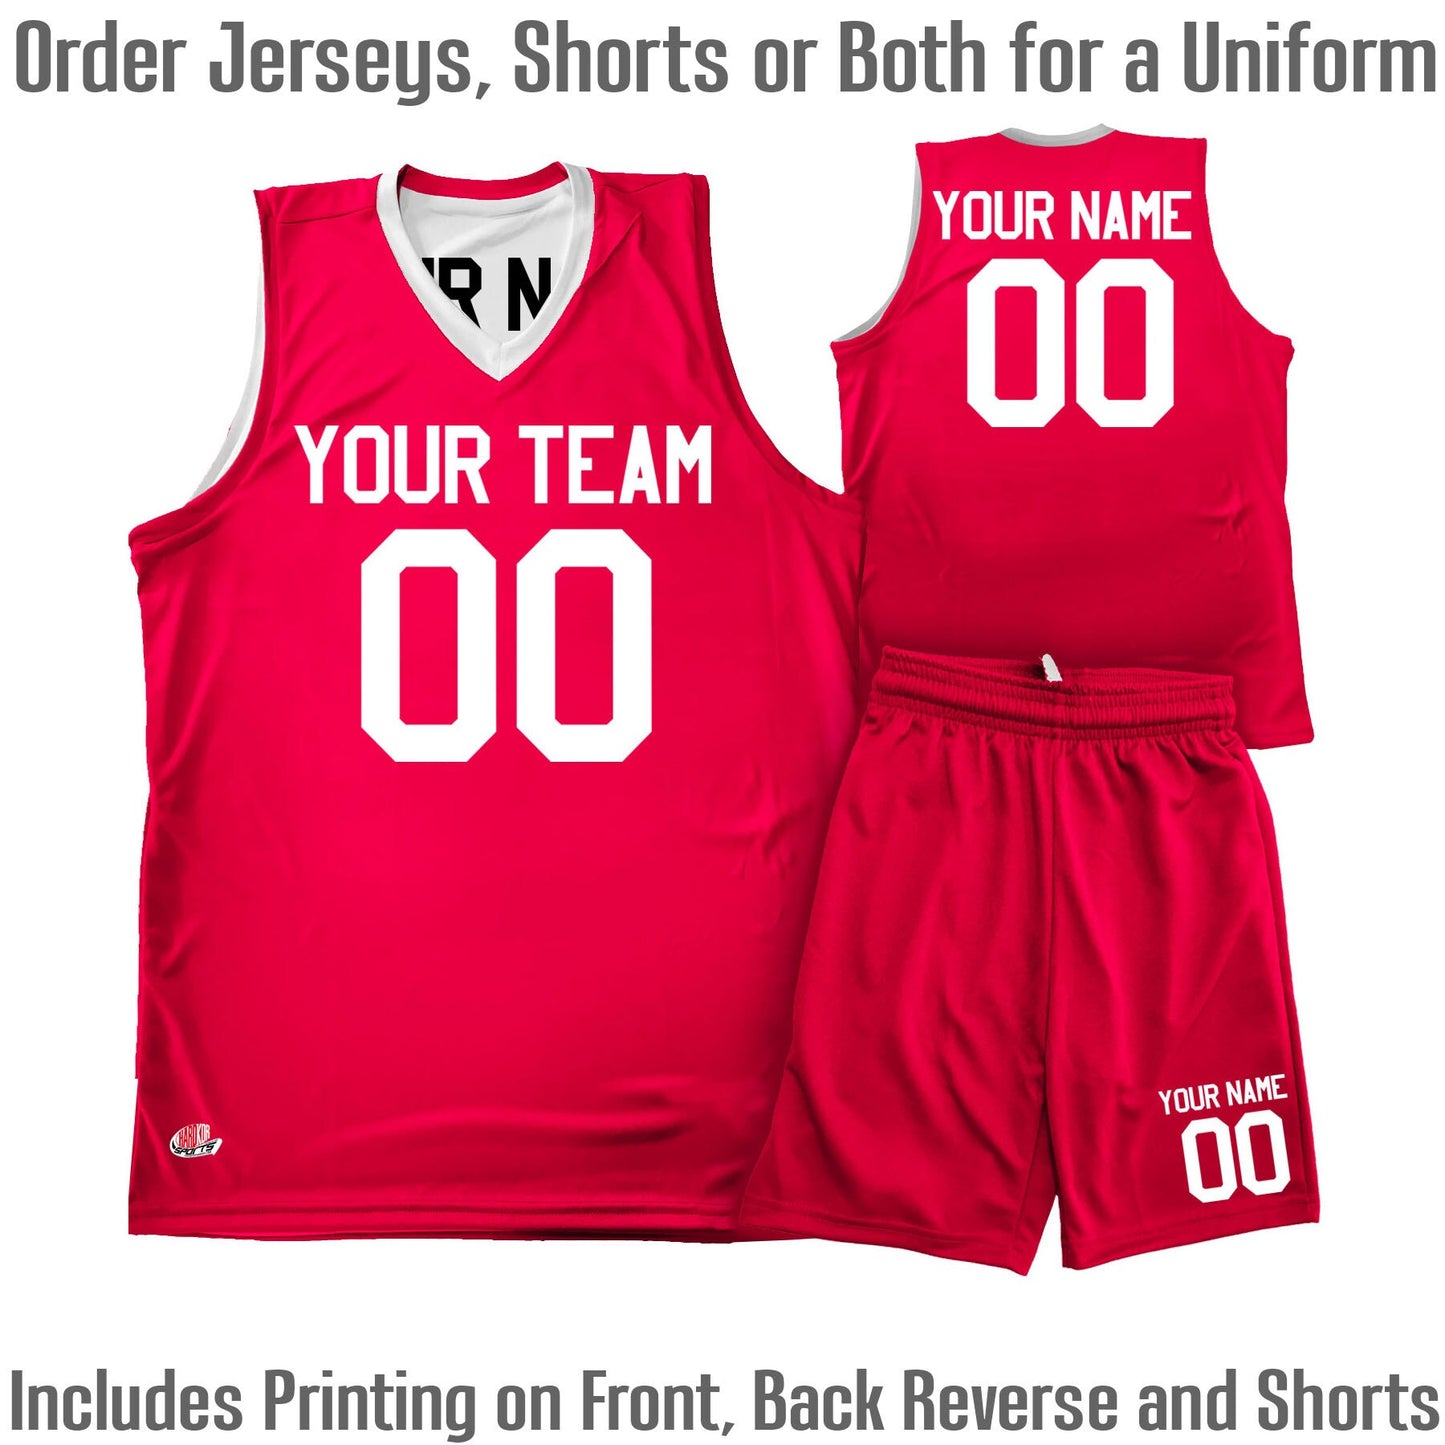 Your Team | Your Name | Custom Reversible Basketball Uniform | Major Team Colors | Add Shorts |  Team Player Name, Numbers